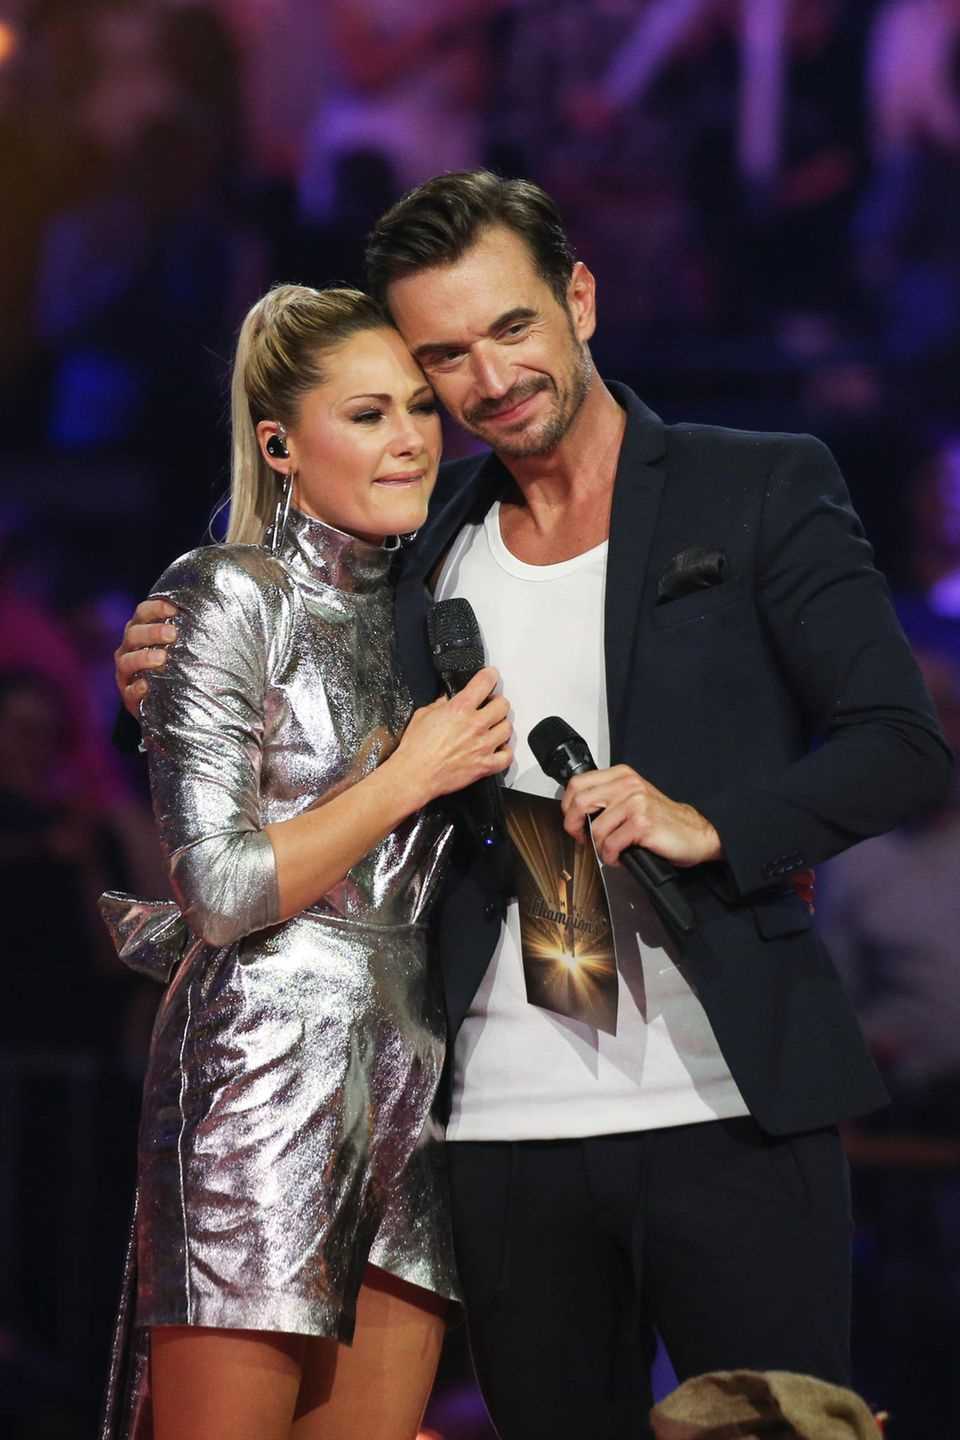 Tears flowed as soon as Helene Fischer and Florian Silbereisen appeared together in public for the first time after the breakup.